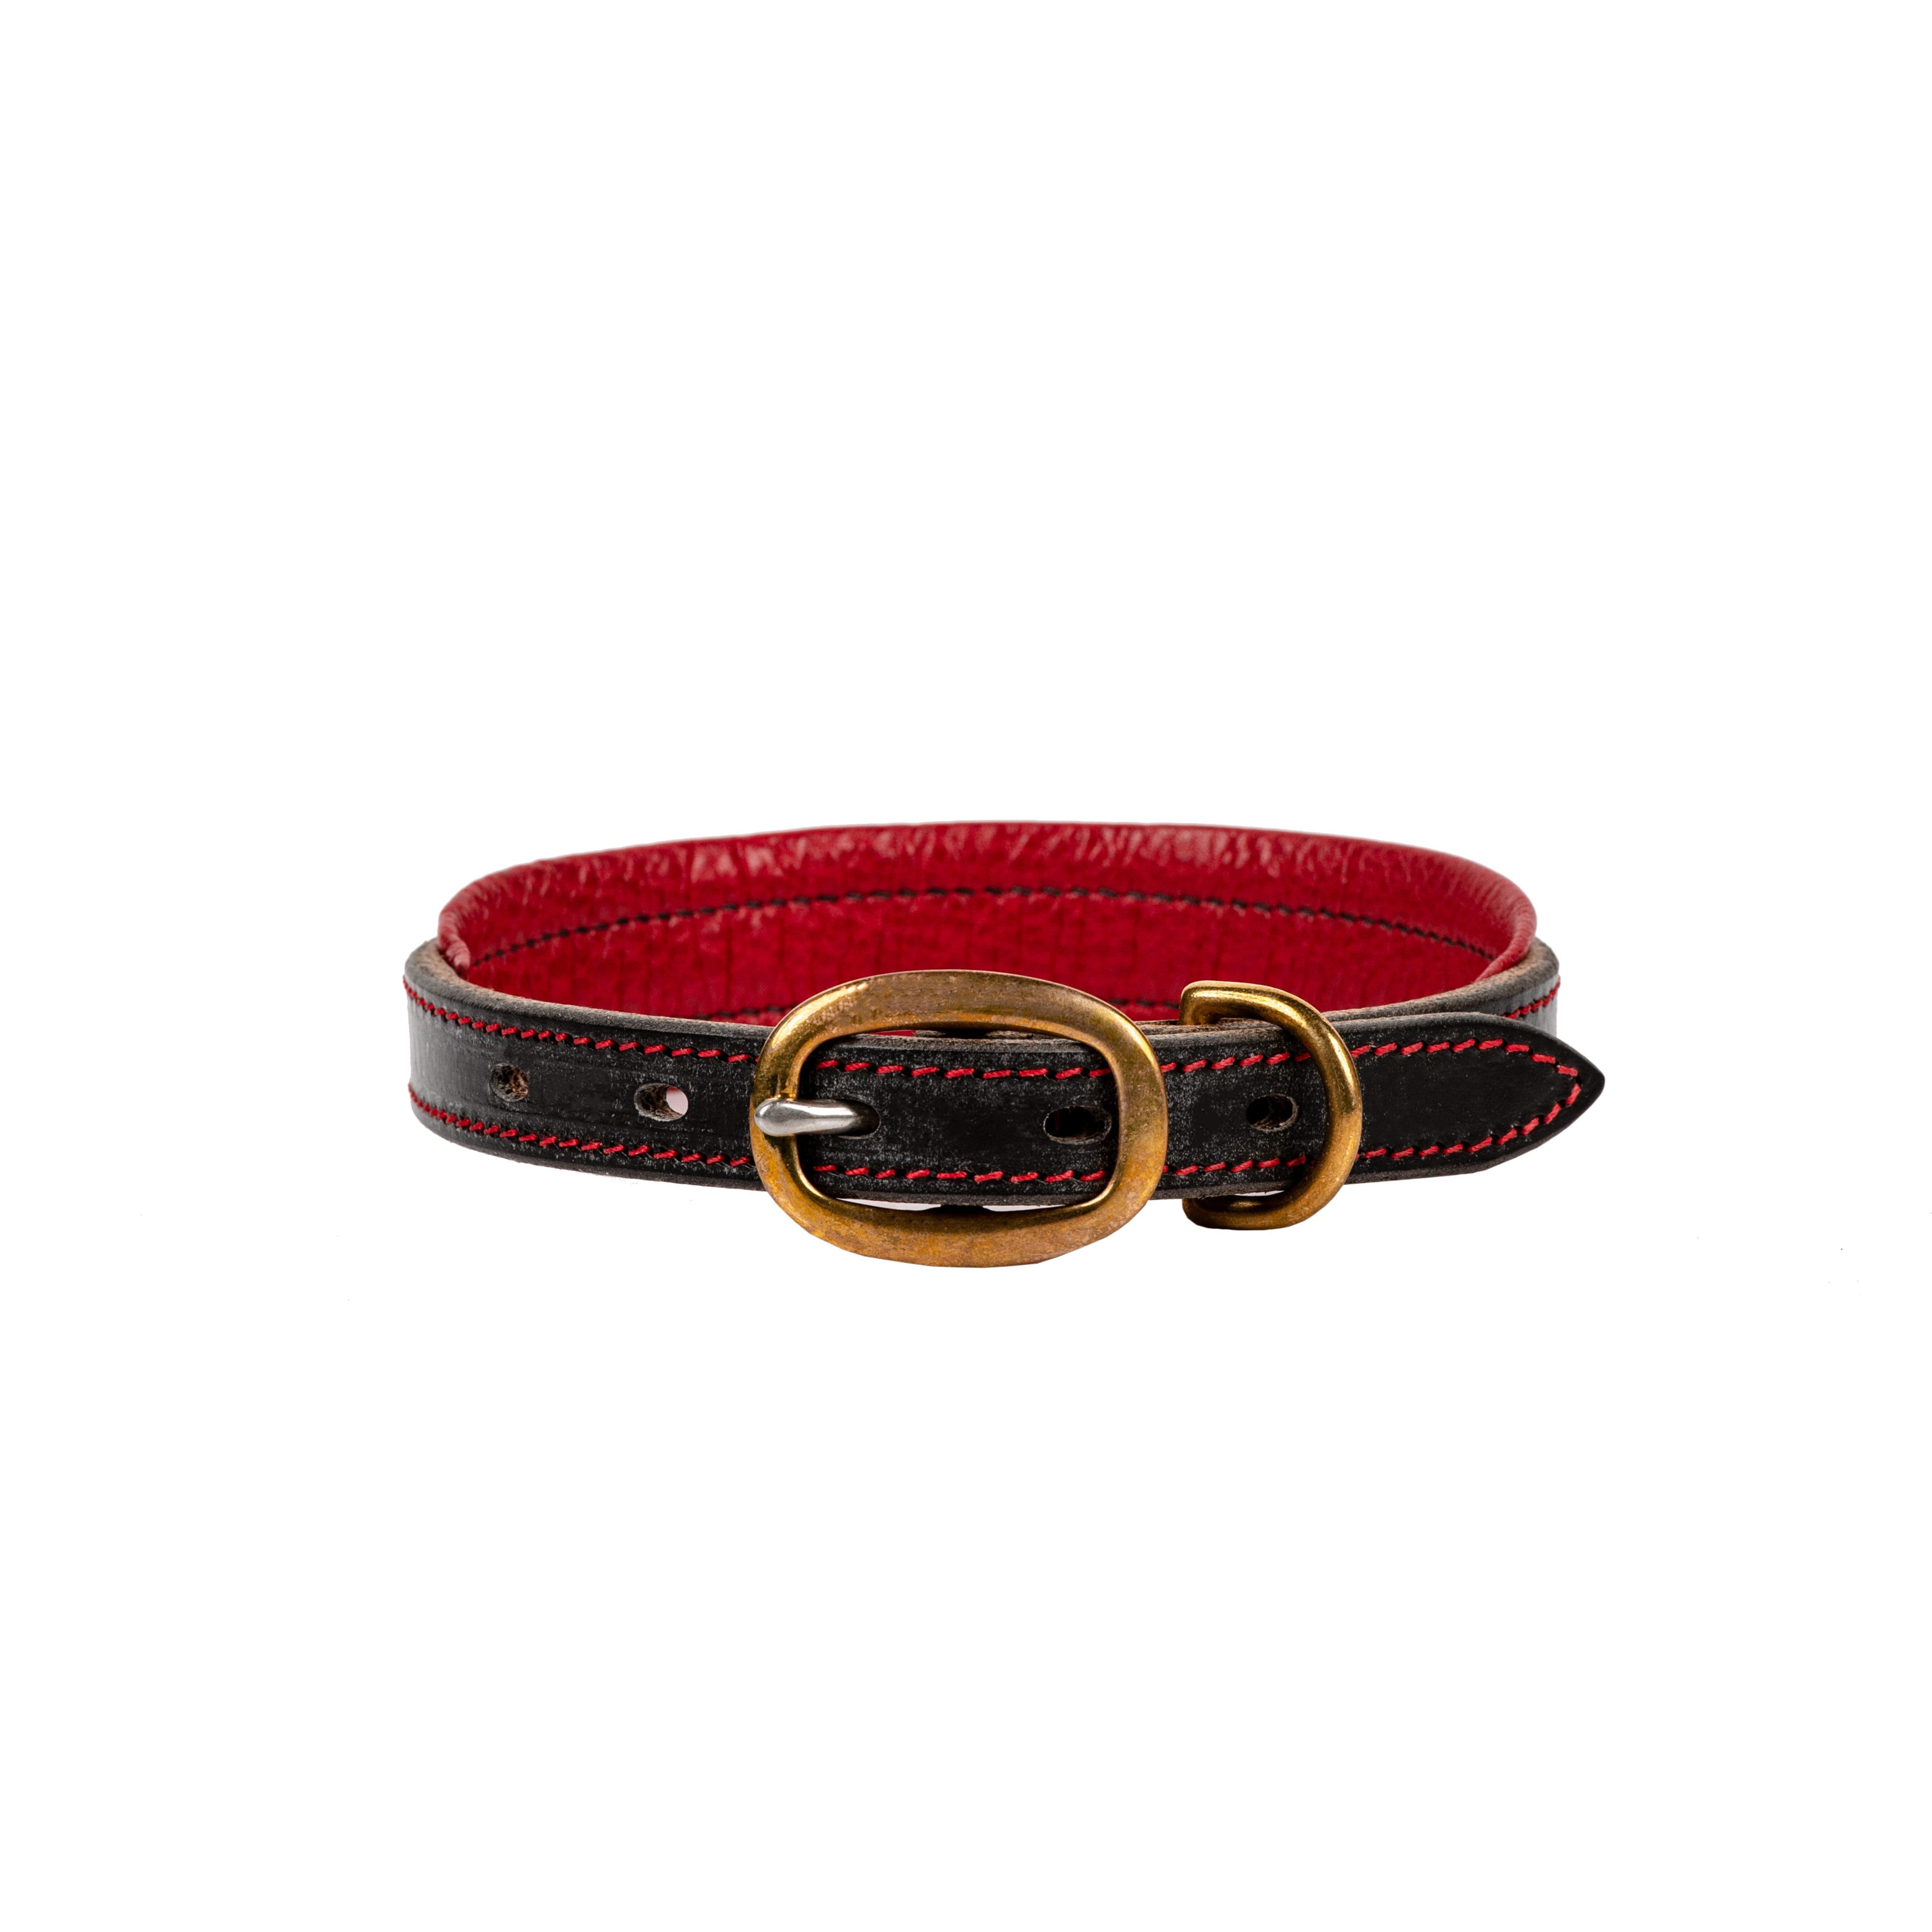 Black Dog Collar with Red Accents - Houndztooth Australia